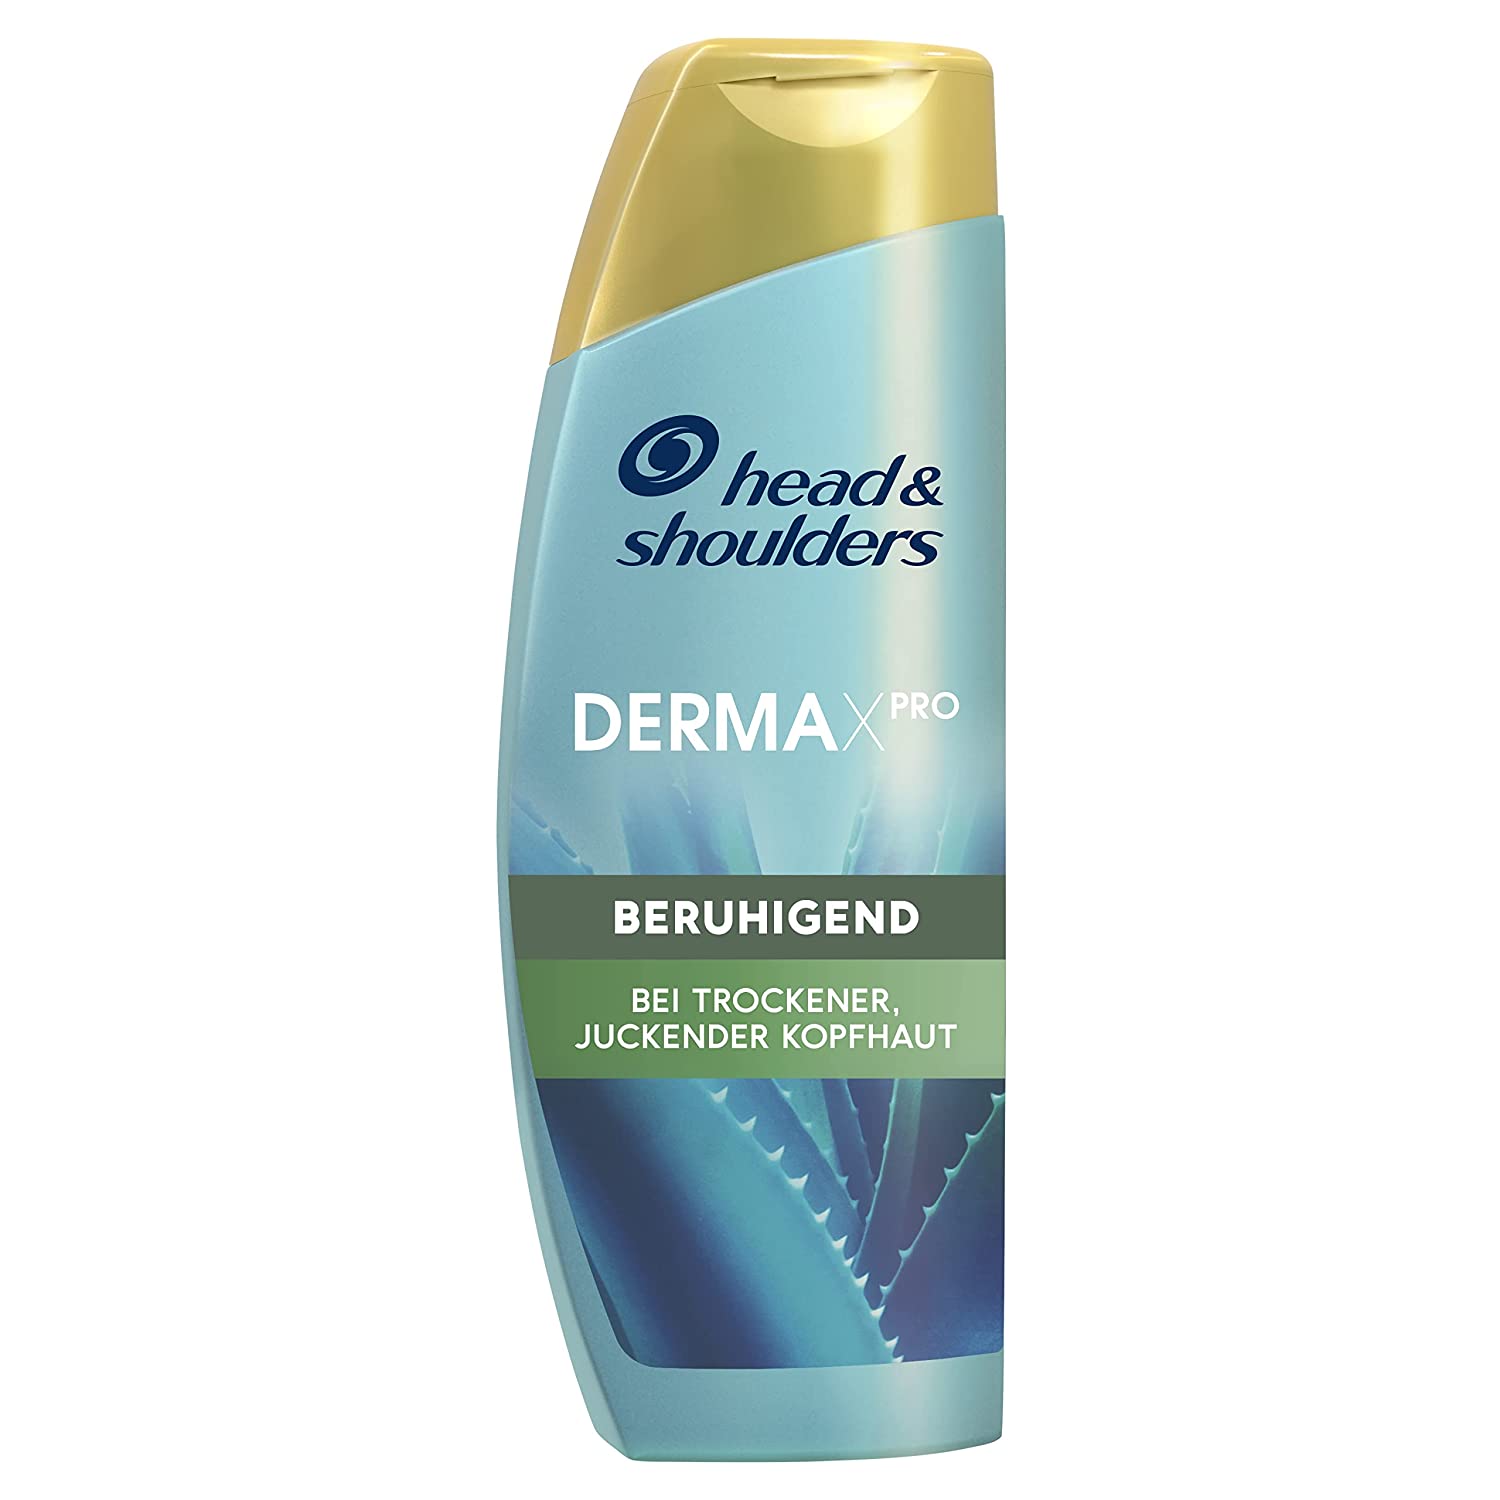 DERMAXPRO Soothing Anti-Dandruff Shampoo & Scalp Care for Dry, Itchy Scalp, 225 ml